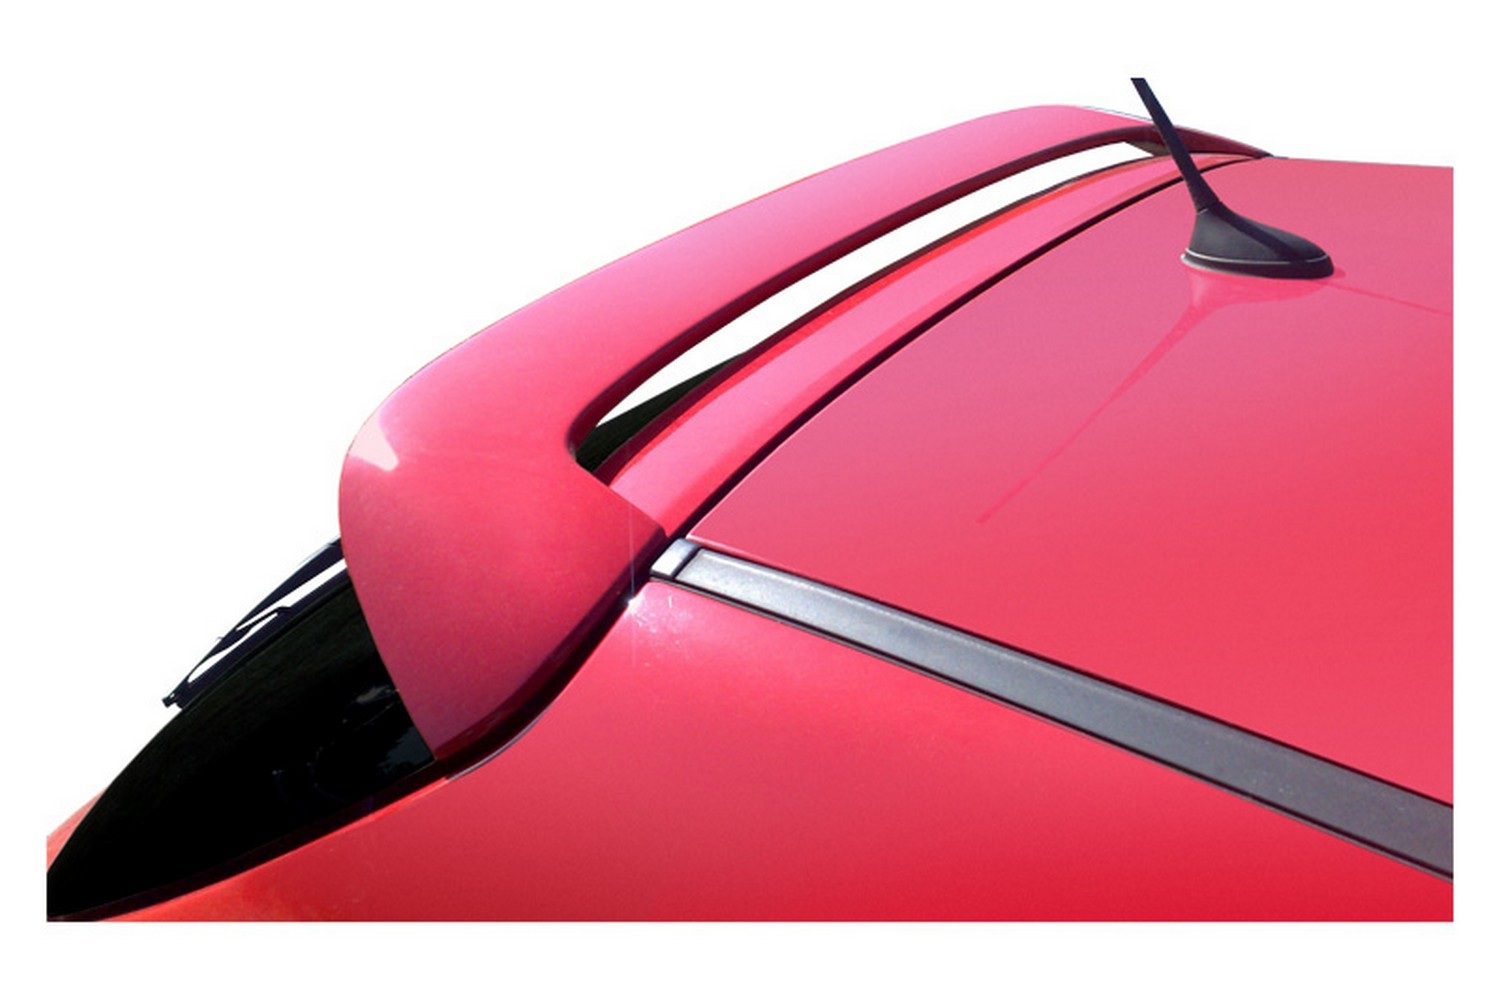 SPOILER REAR ROOF TAILGATE PEUGEOT 206 206+ hatchback WING ACCESSORIES